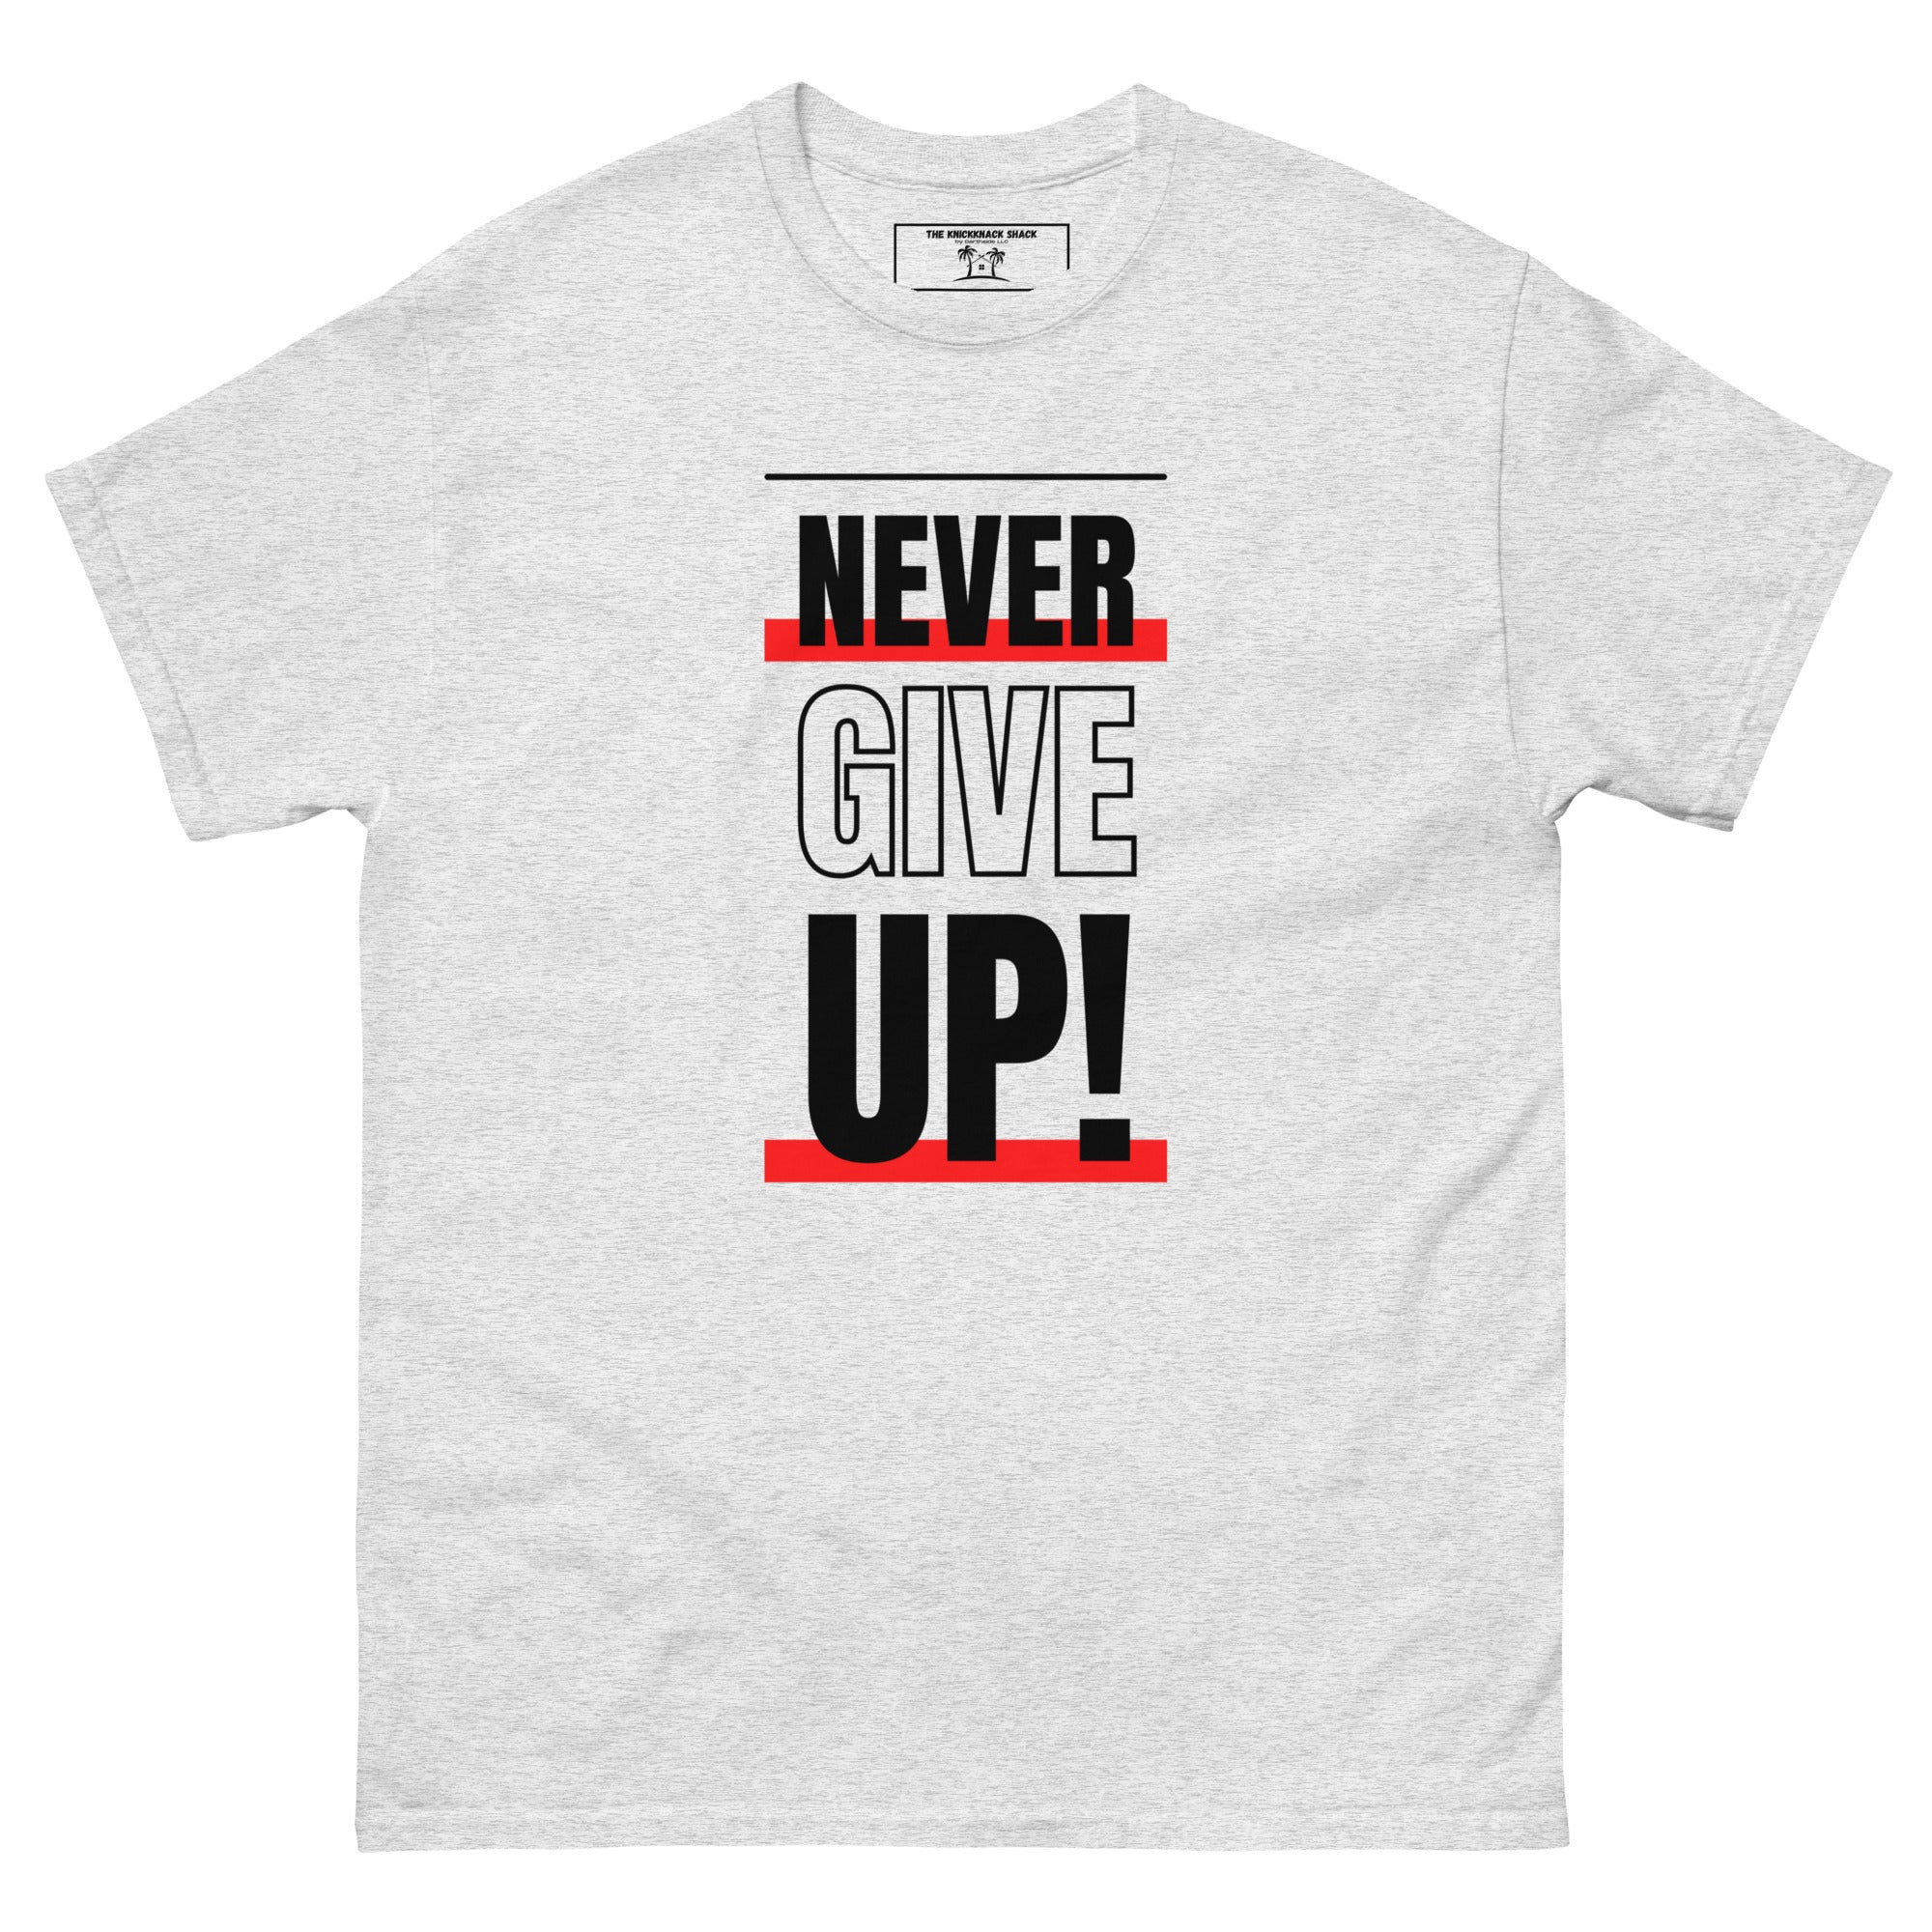 Tee-shirt classique - Never Give Up (couleurs claires)